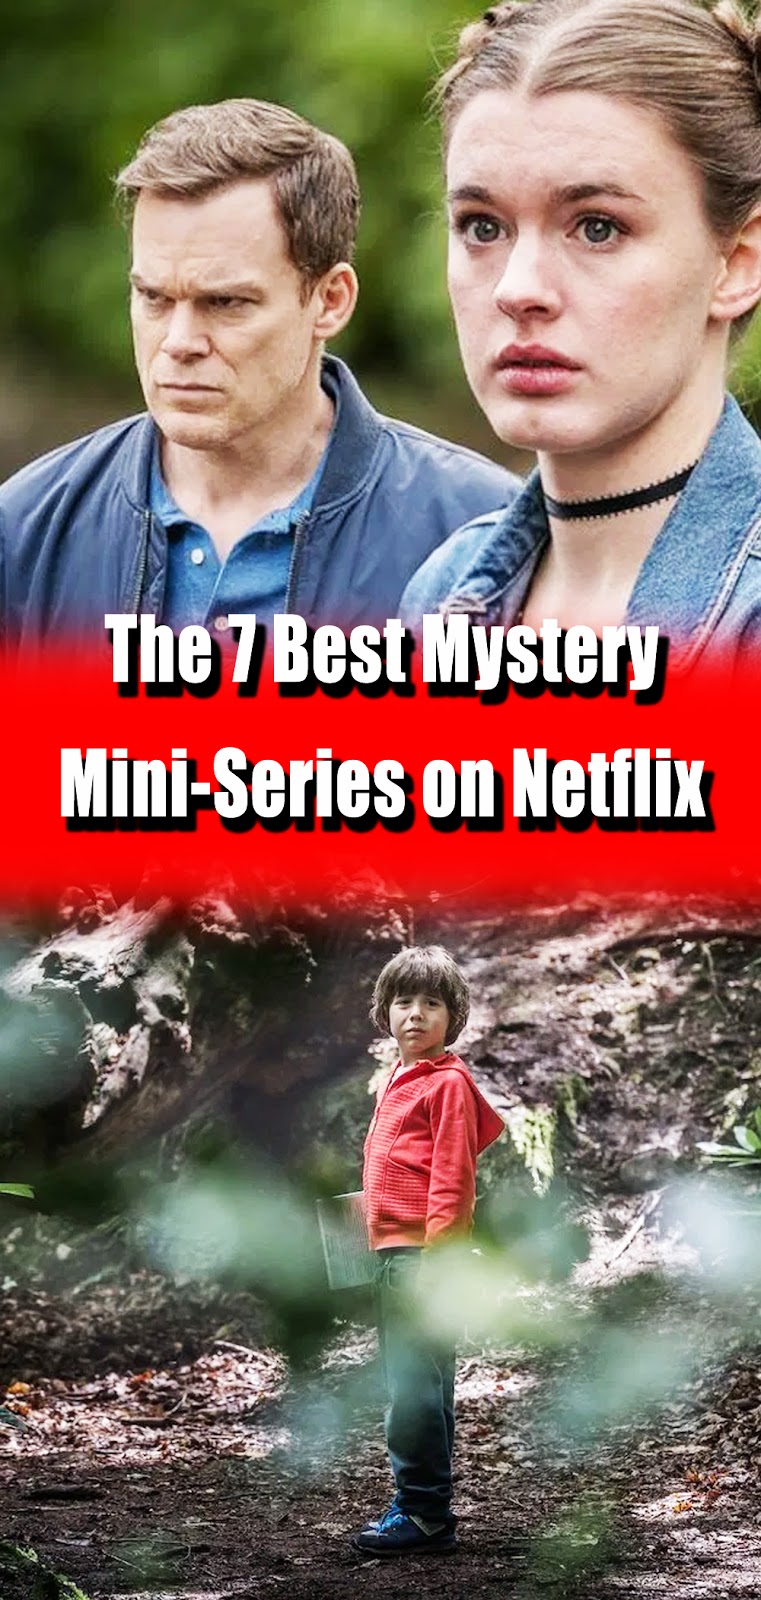 The 7 Best Mystery MiniSeries on Netflix 3 SECONDS